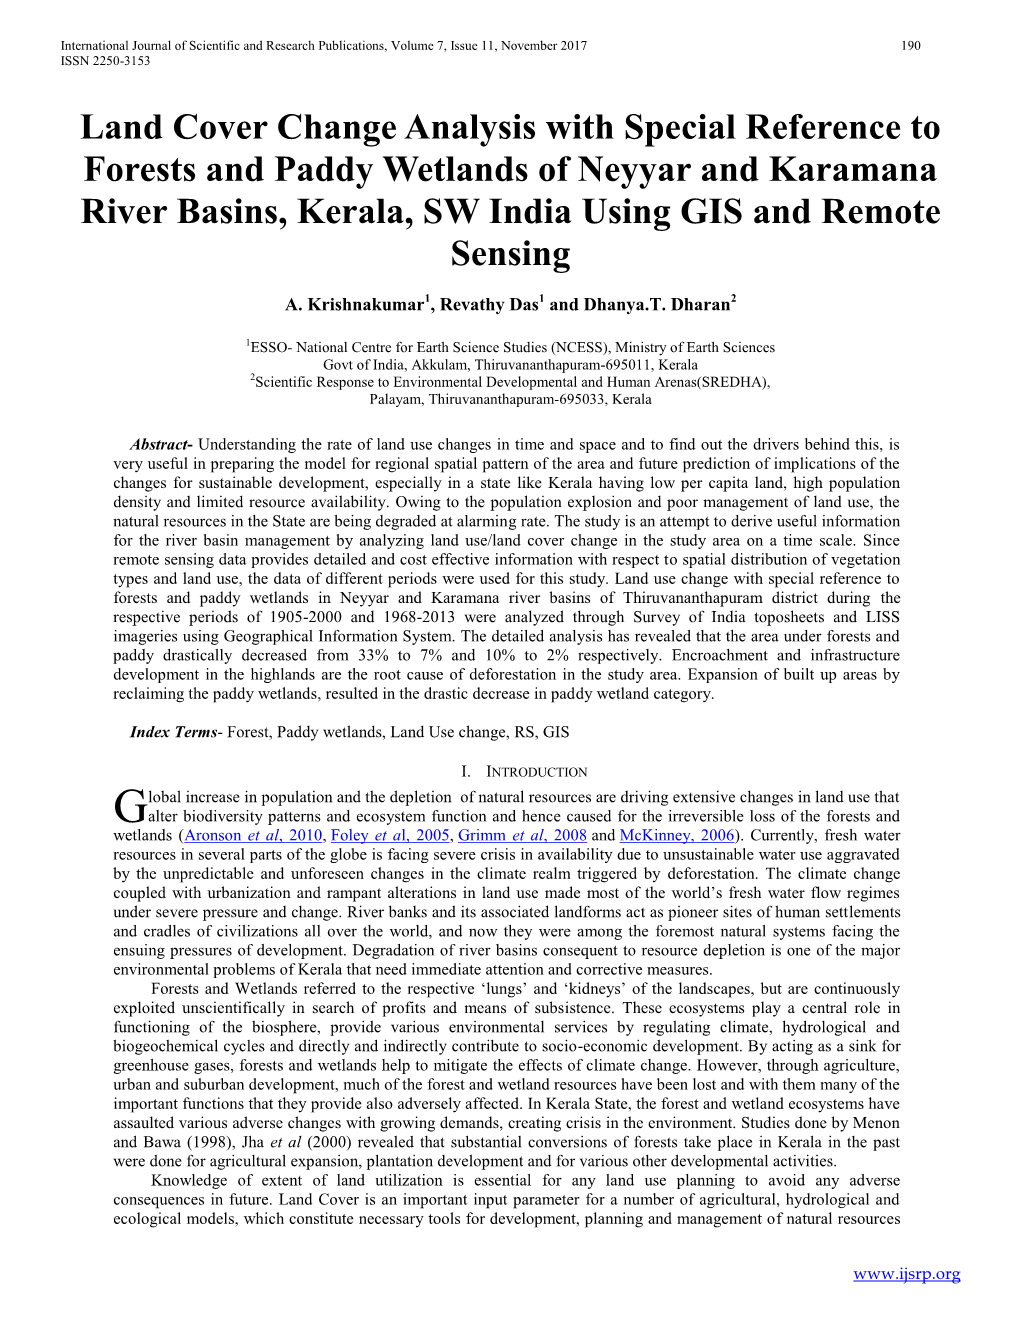 Land Cover Change Analysis with Special Reference to Forests and Paddy Wetlands of Neyyar and Karamana River Basins, Kerala, SW India Using GIS and Remote Sensing